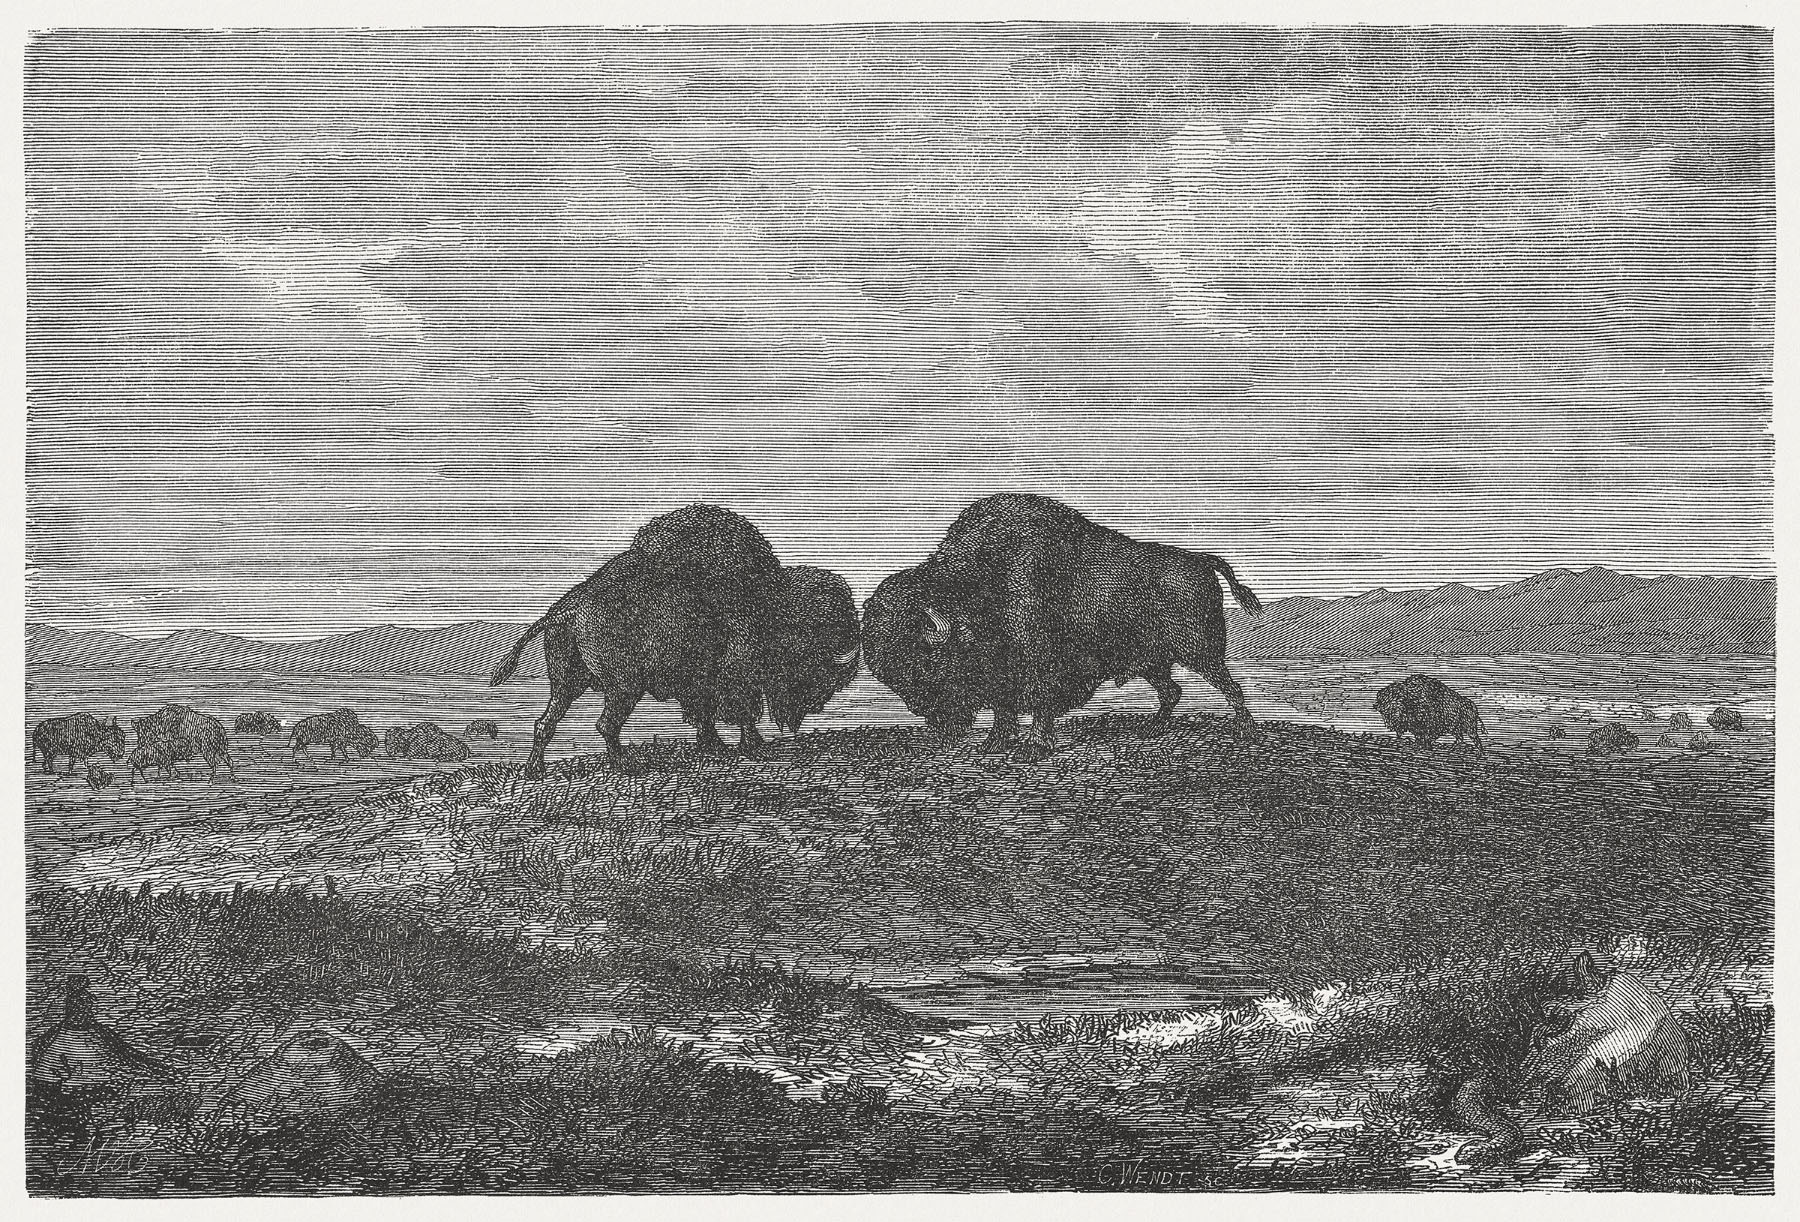 A wood carving print of two bison about to engage in a display of force by ramming their heads together